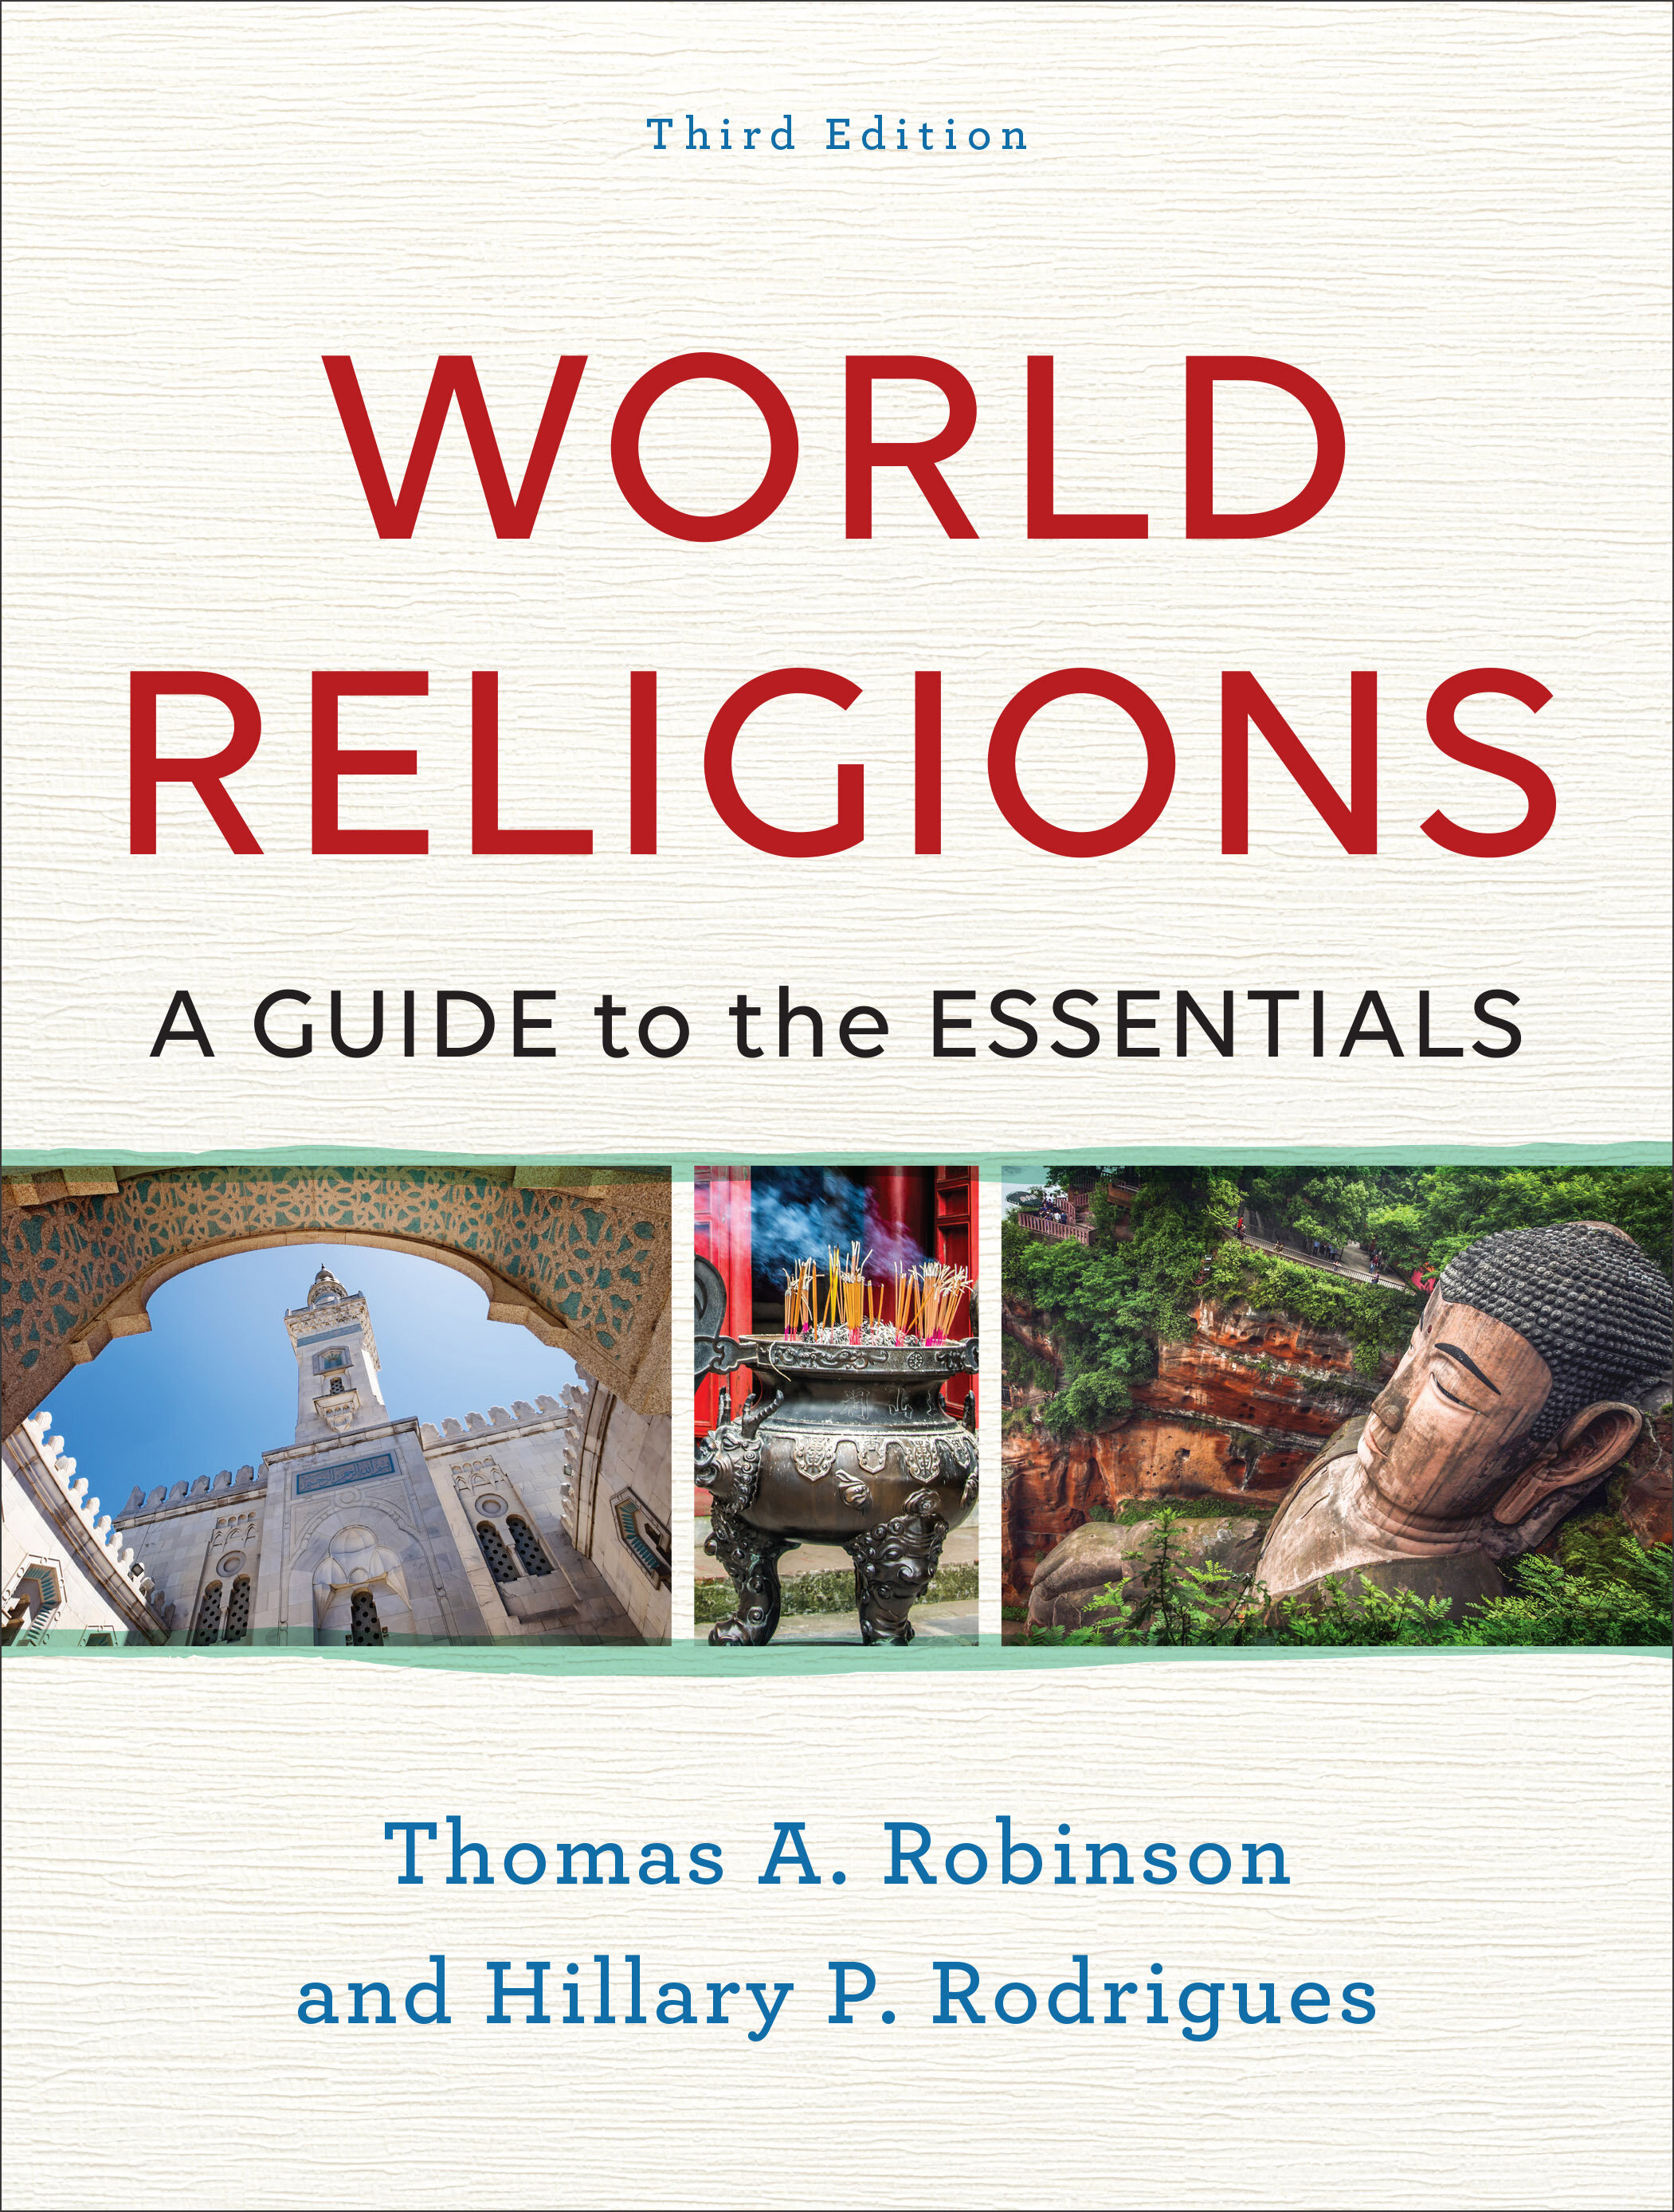 World Religions: A Guide to the Essentials, 3rd ed.